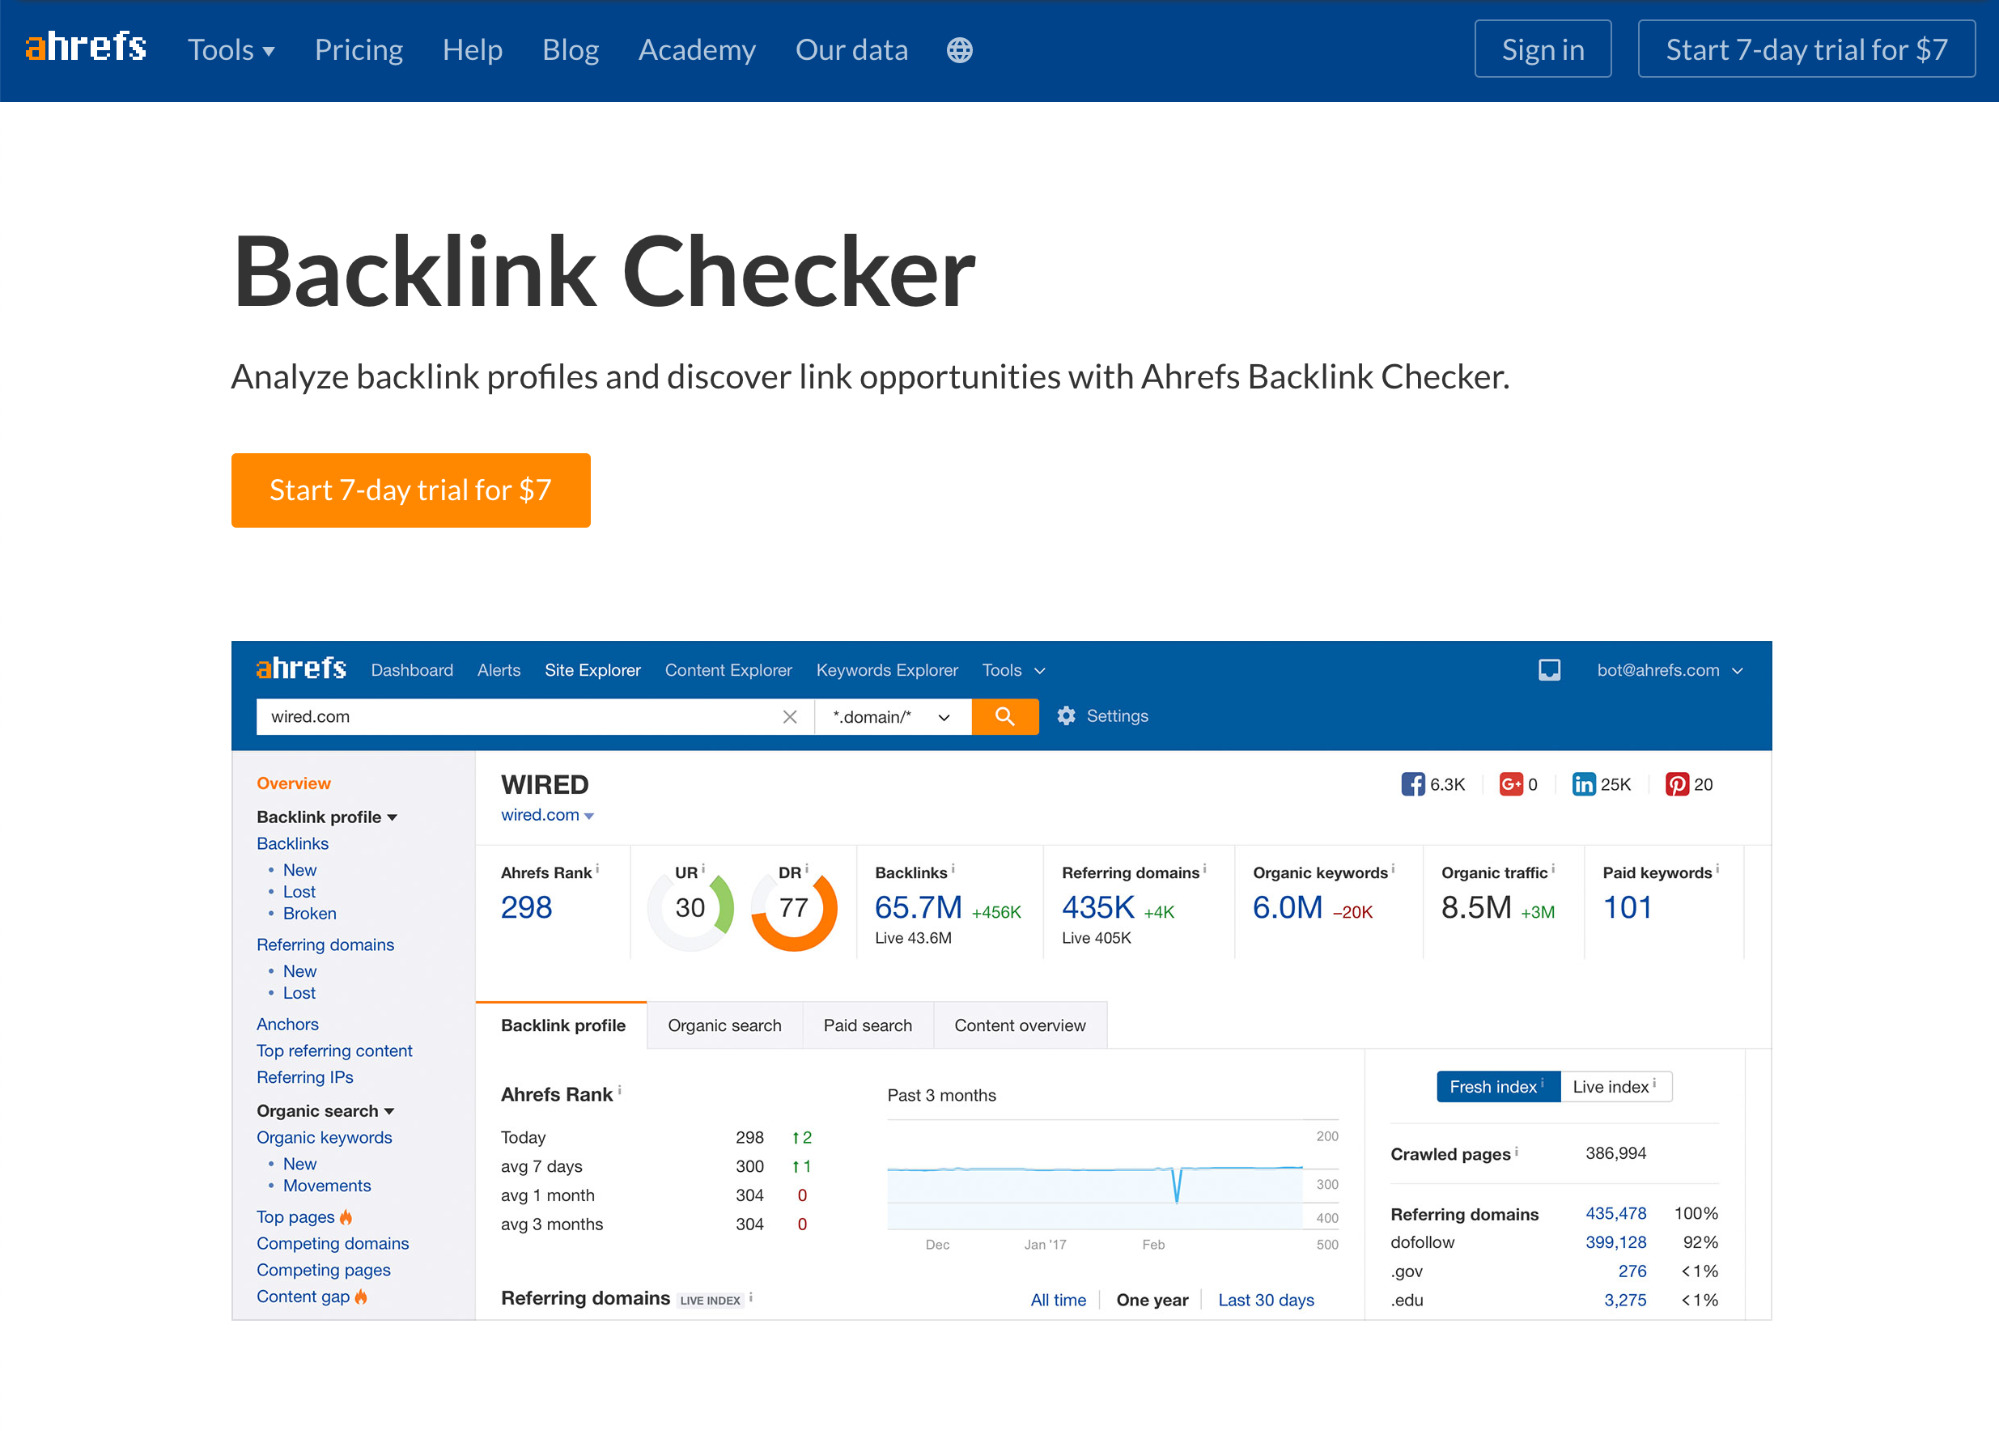 Original landing page for our free backlink checker